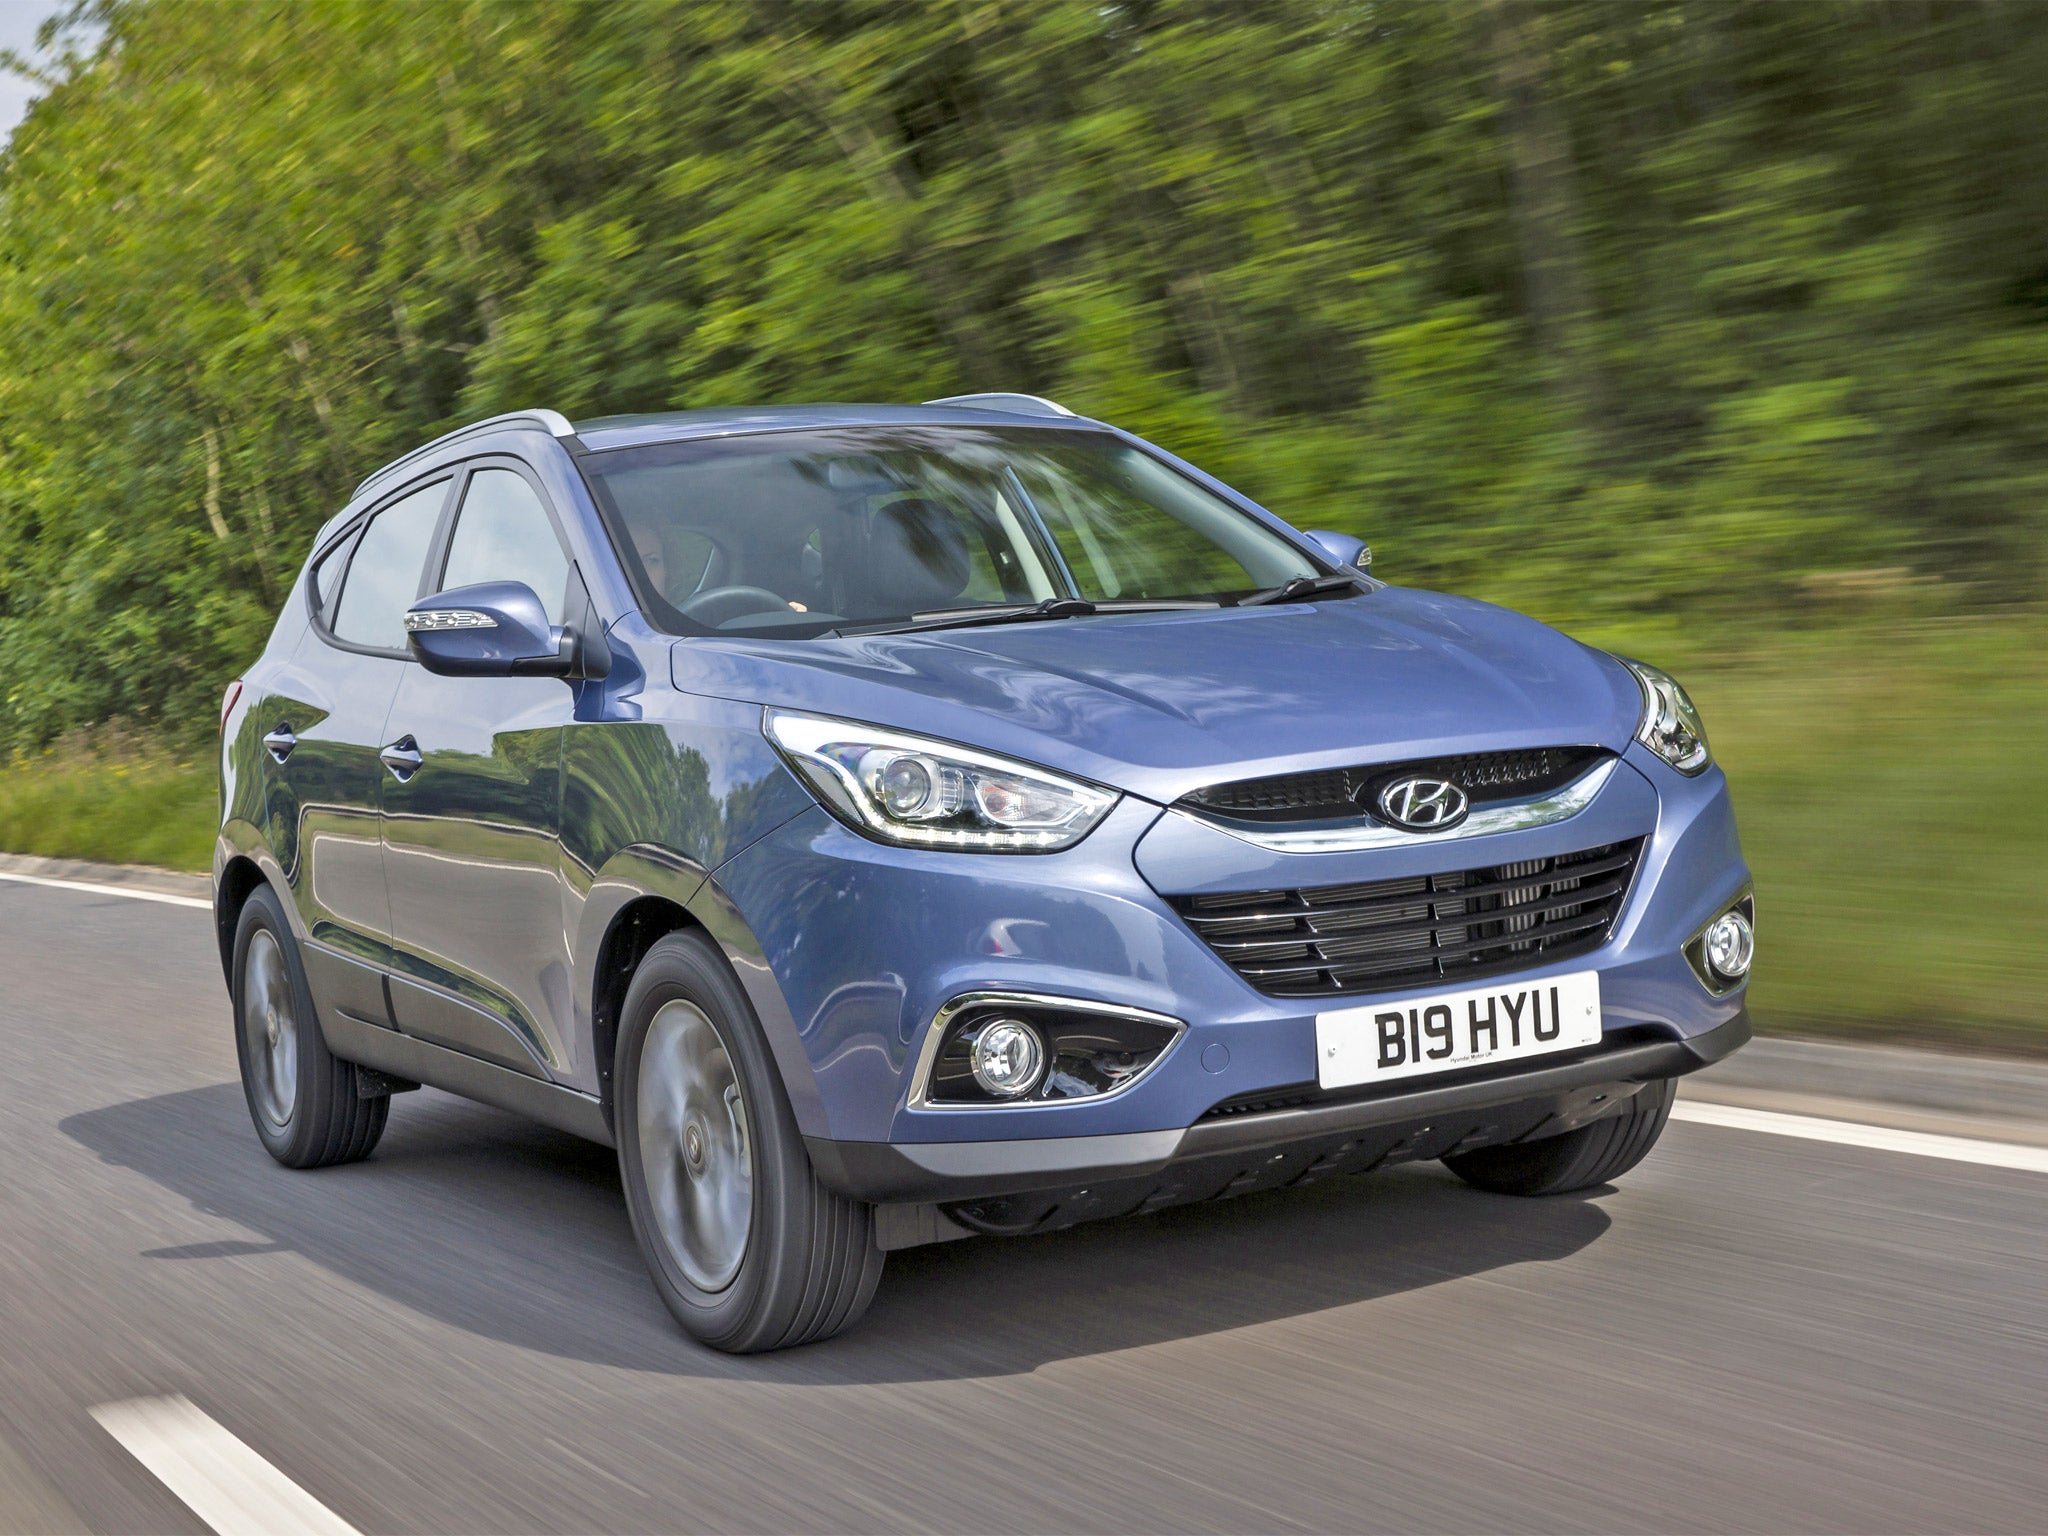 A tidy package: the new Hyundai ix35